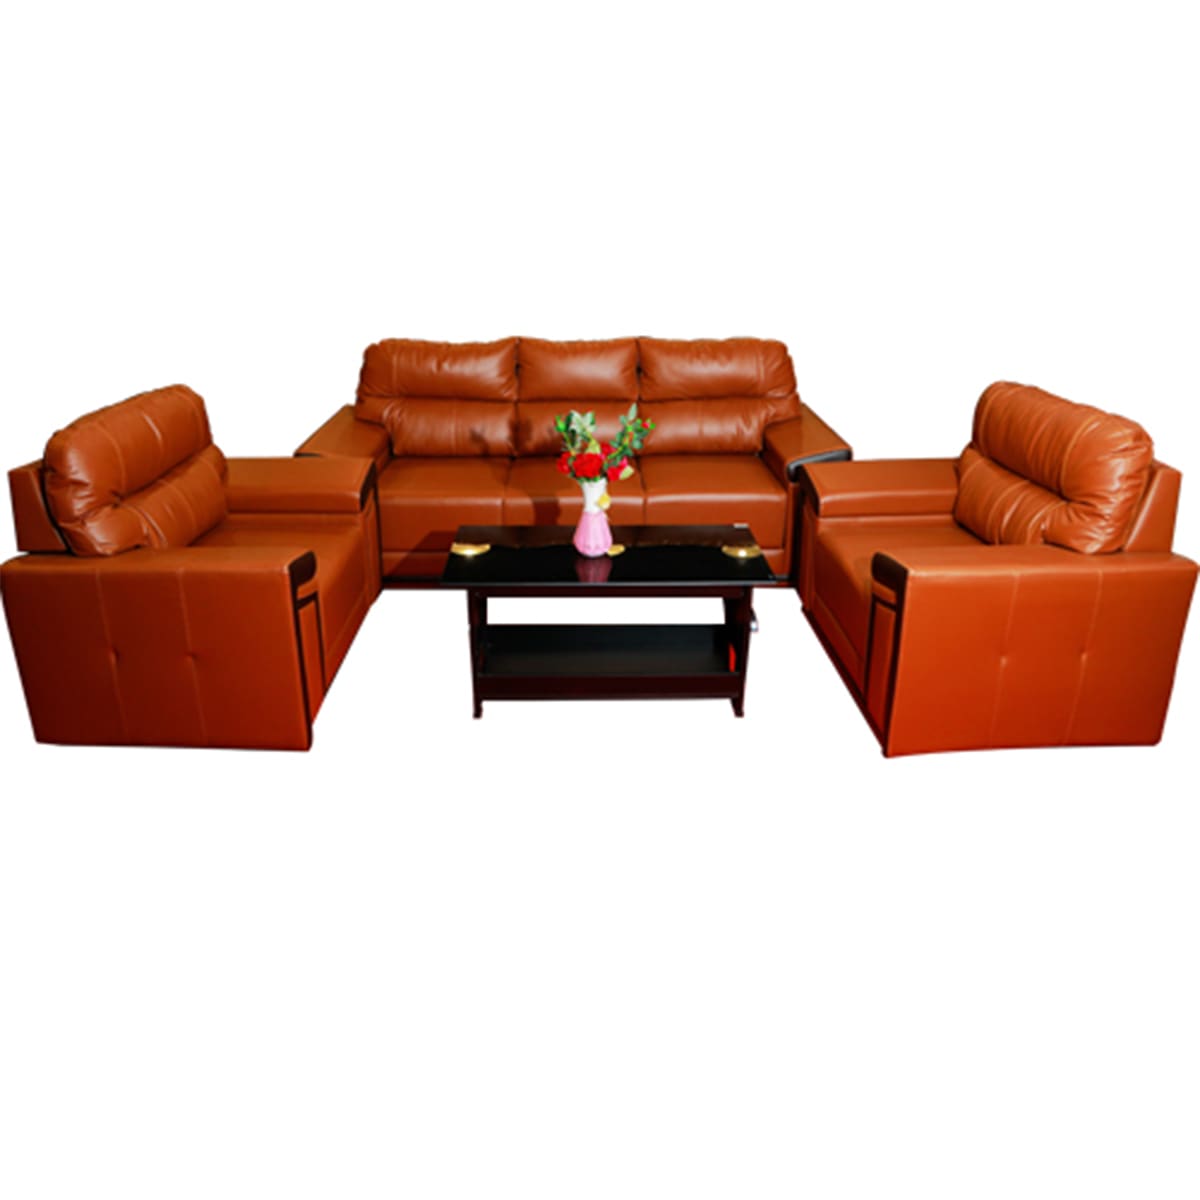 Recrone Sofa With Glass Teapoy